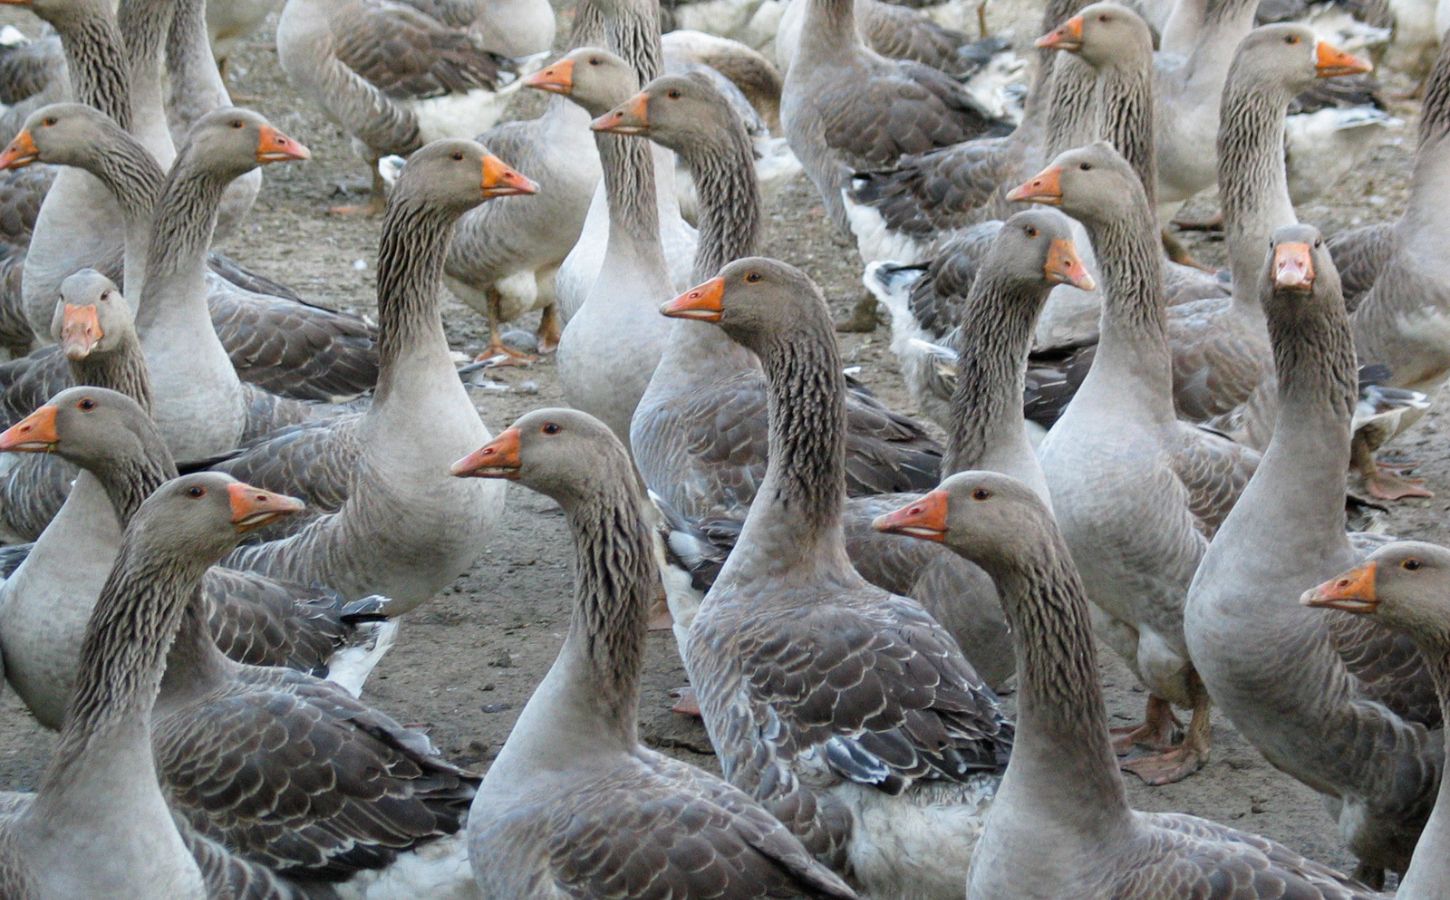 Numerous geese on a traditional goose farm, some of which produce foie gras